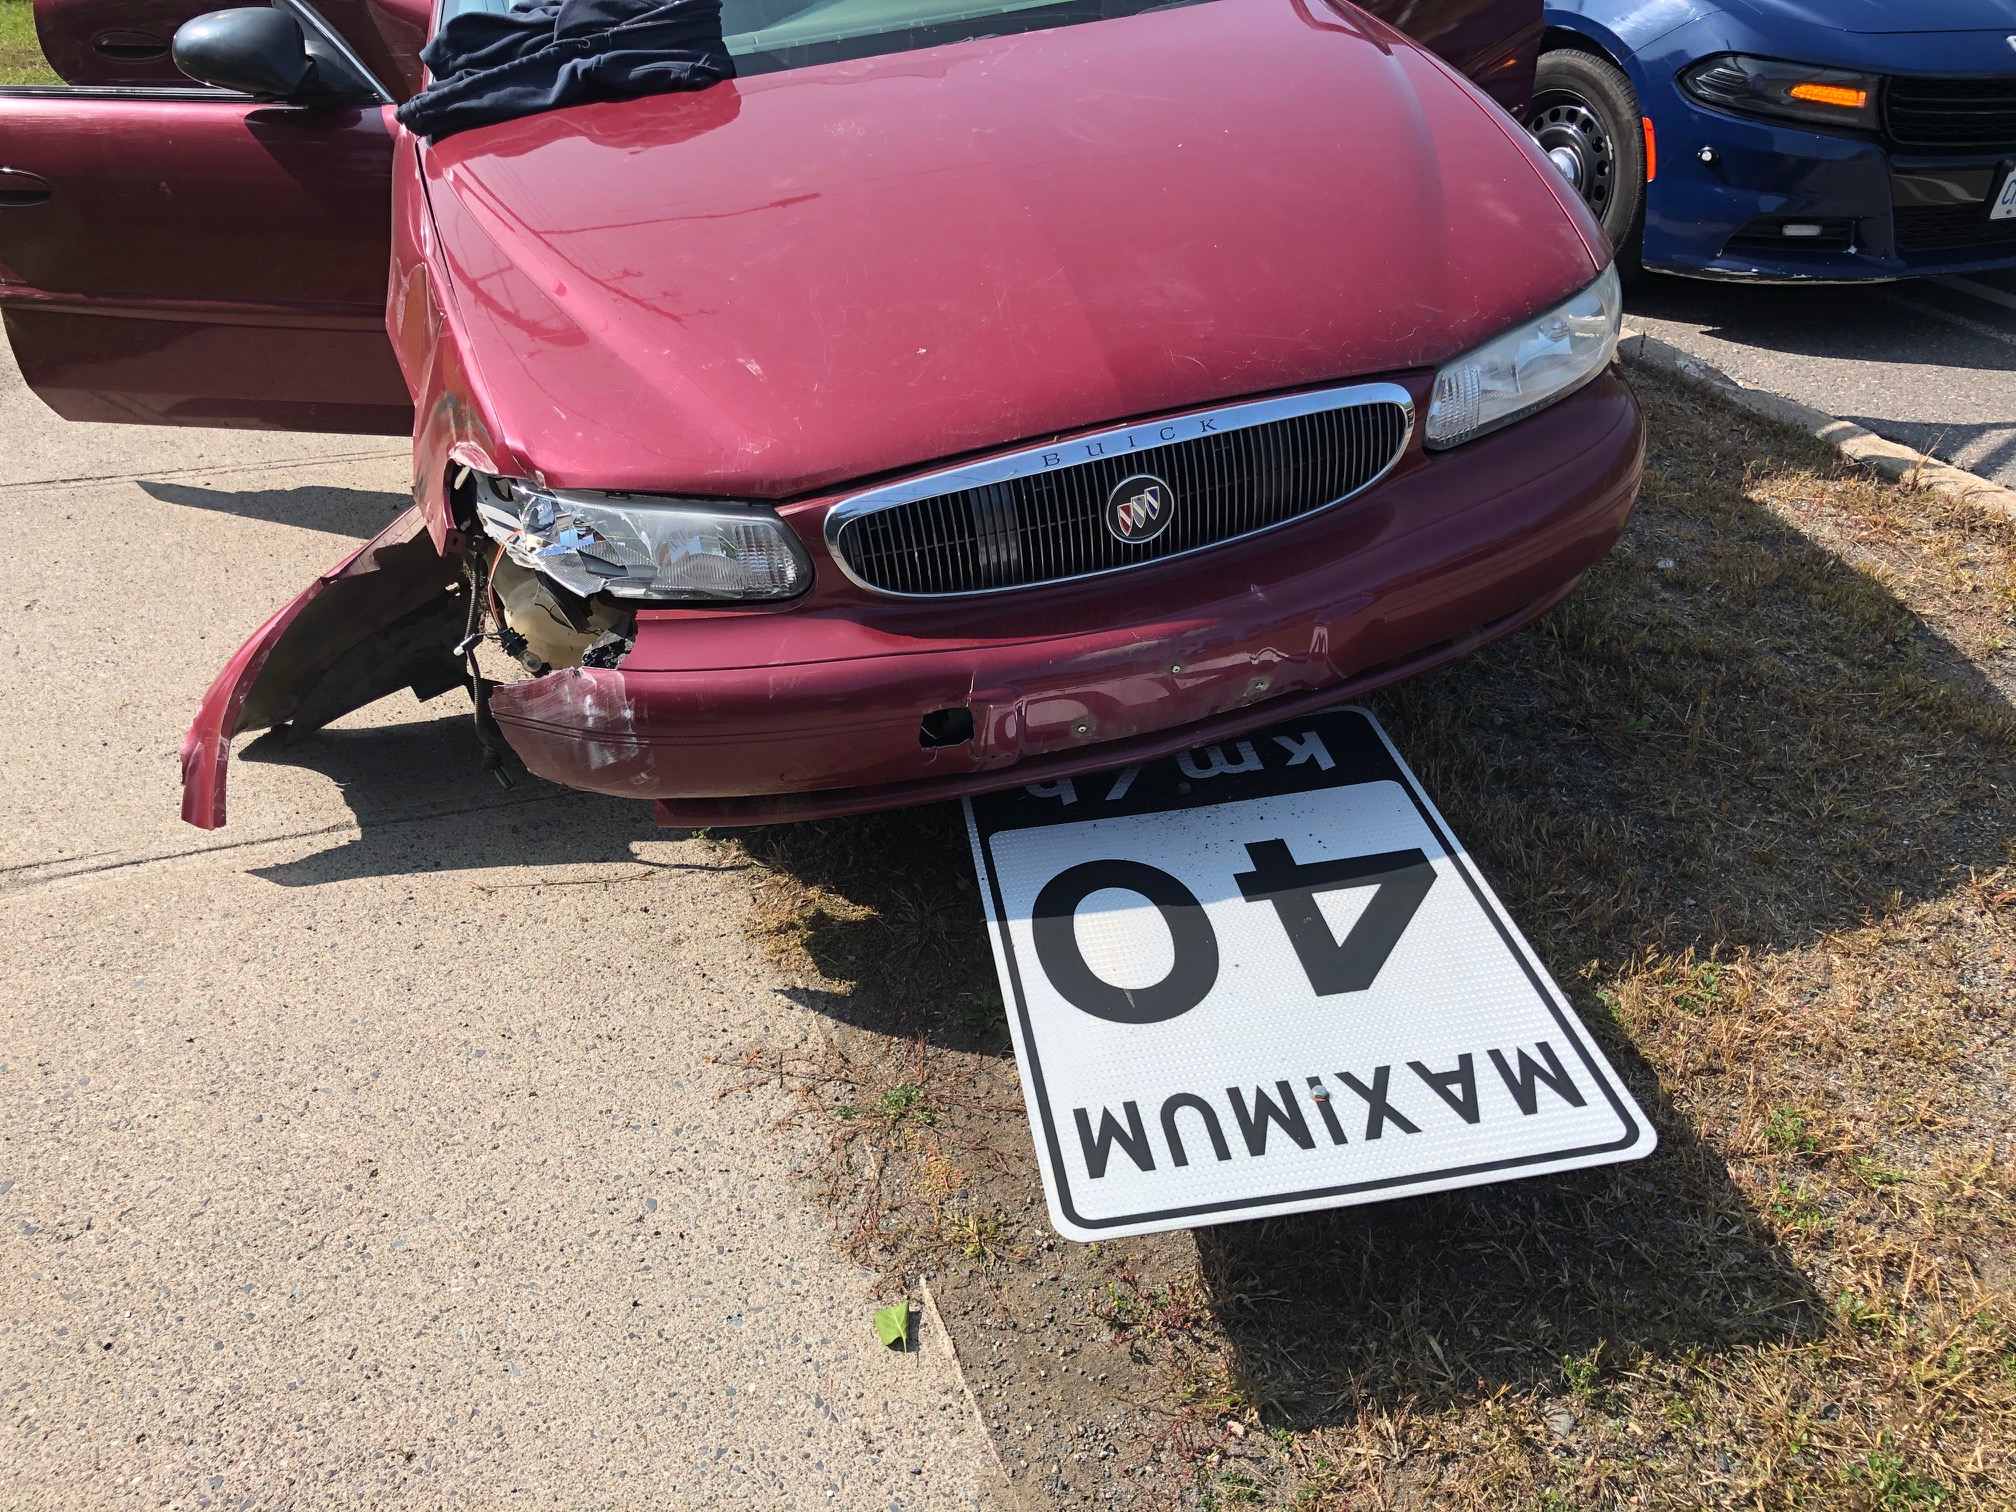 Impaired driver collides near school as students being dismissed